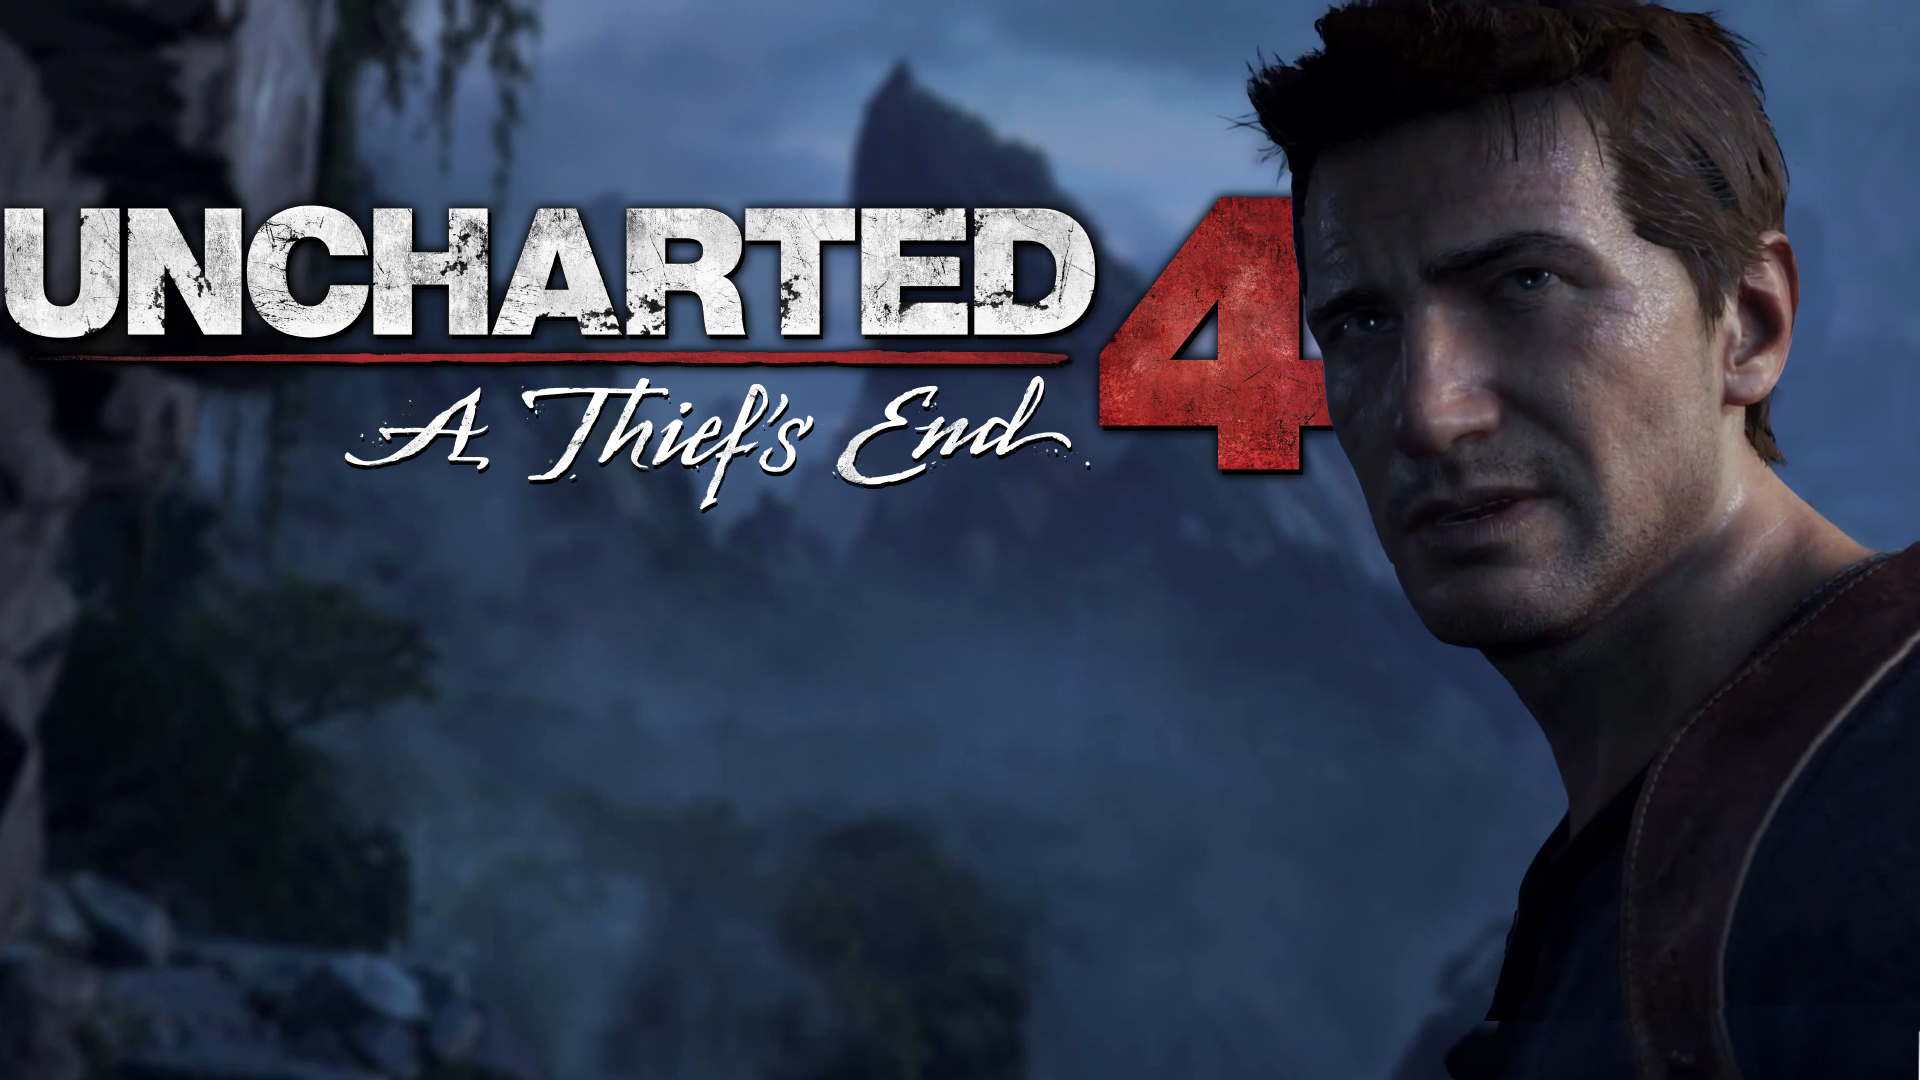 Uncharted 4 A Thiefs End - Uncharted 4: A Thief's End